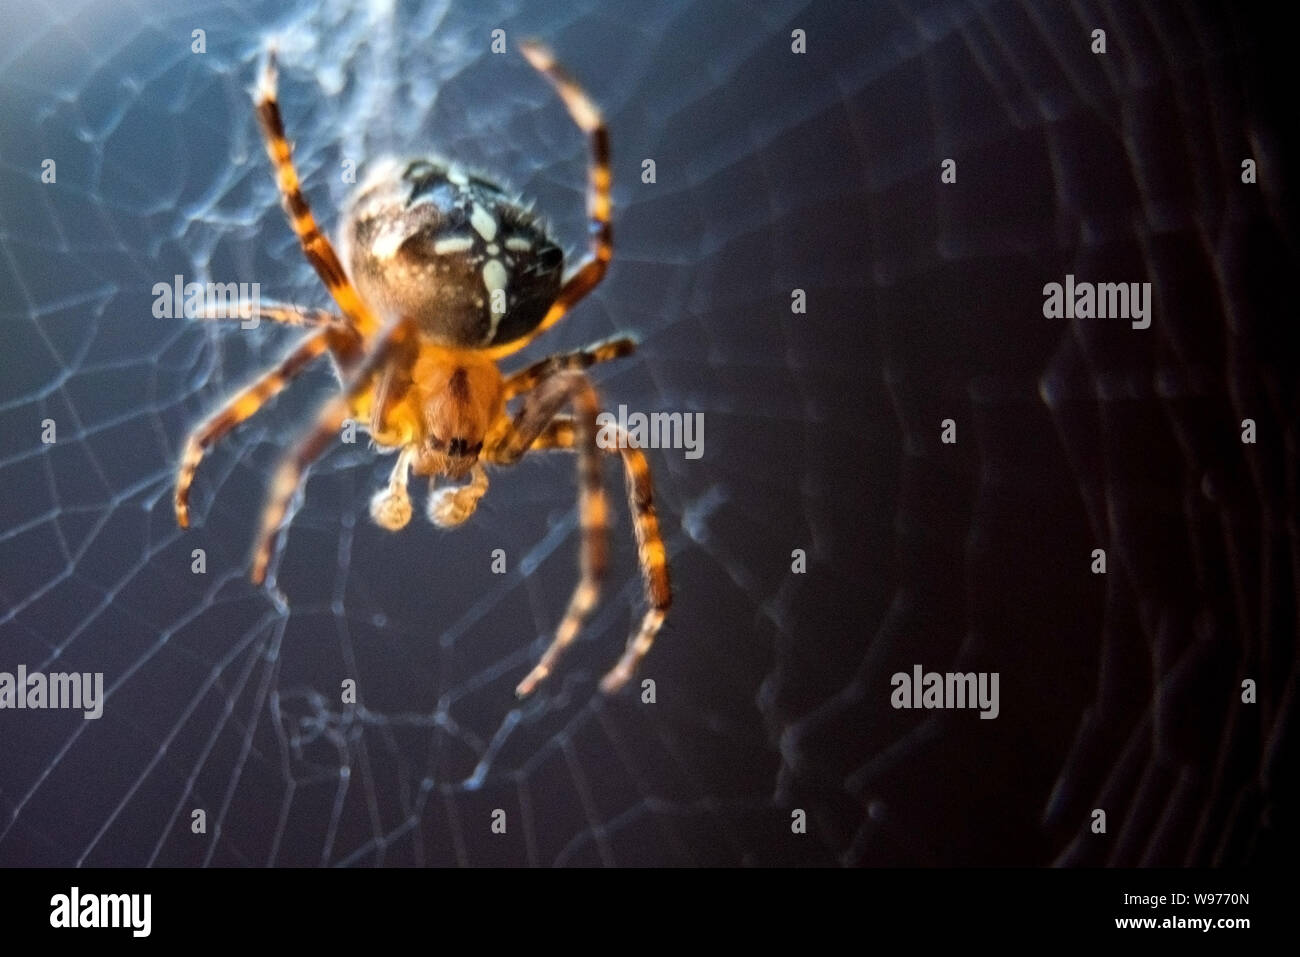 The spider species Araneus diadematus is commonly called the European garden spider, diadem spider, cross spider and crowned orb weaver. Stock Photo